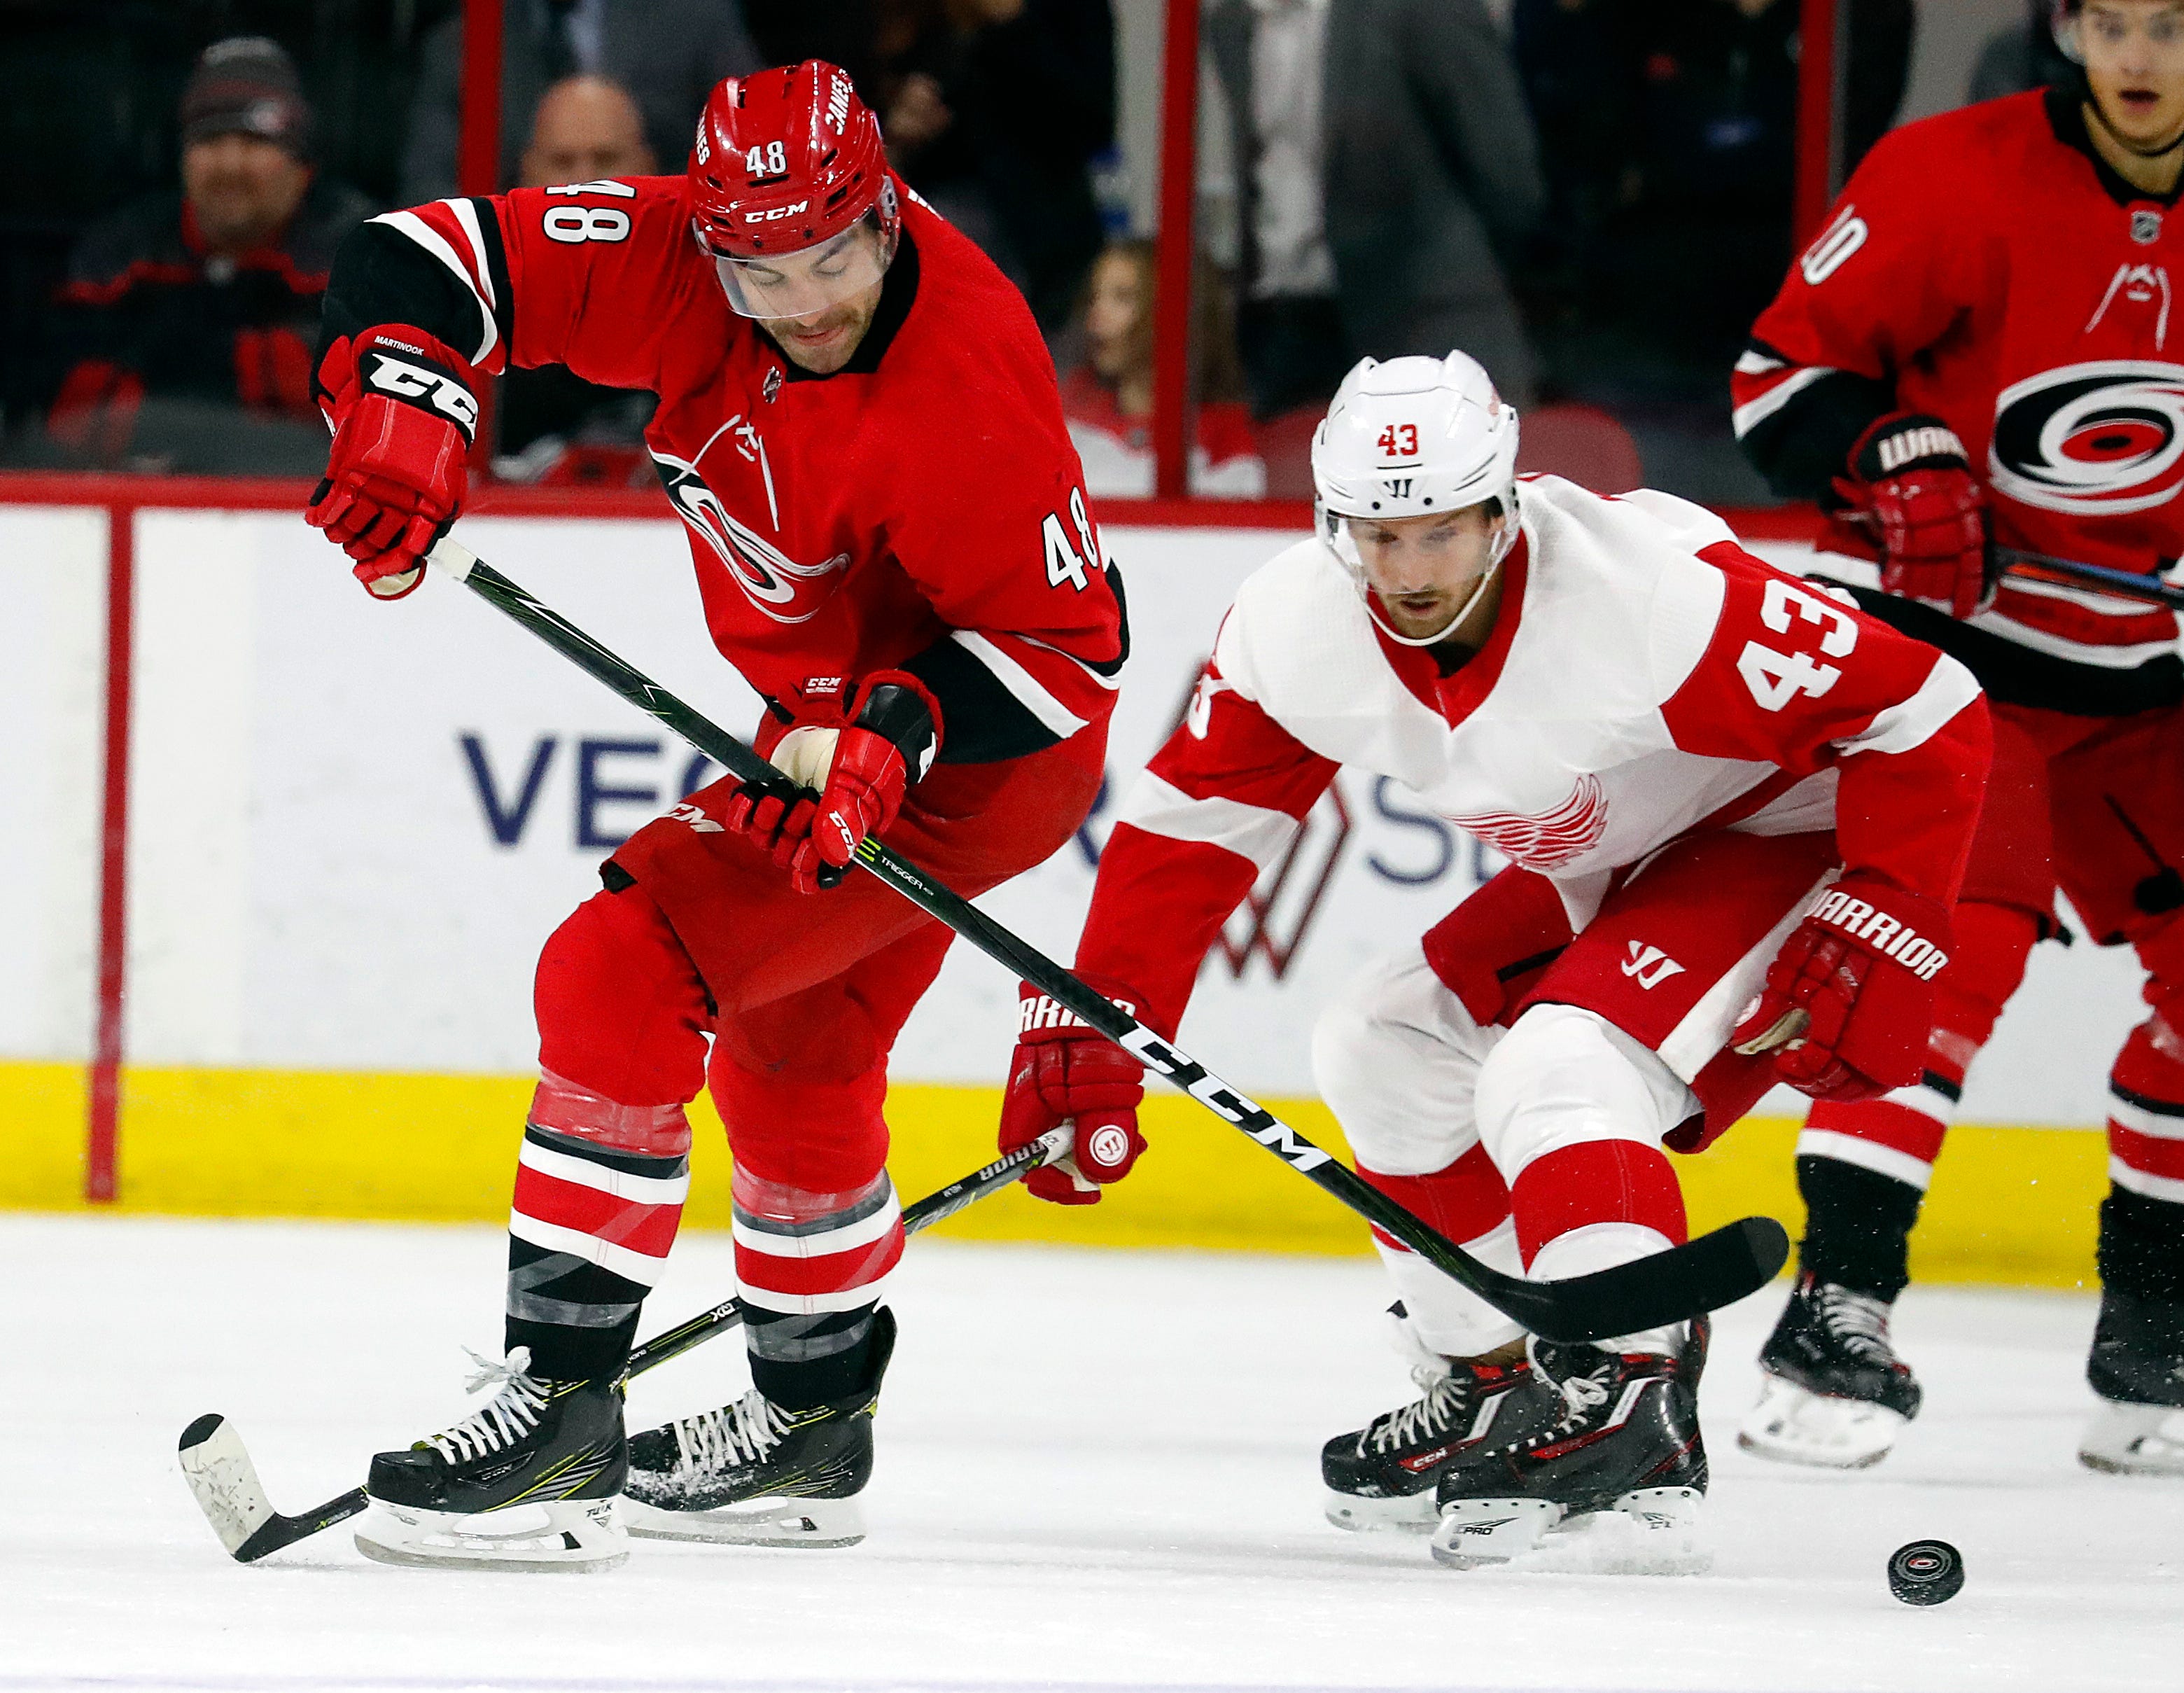 Mantha scores twice, Red Wings top Canes 4-3 in shootout